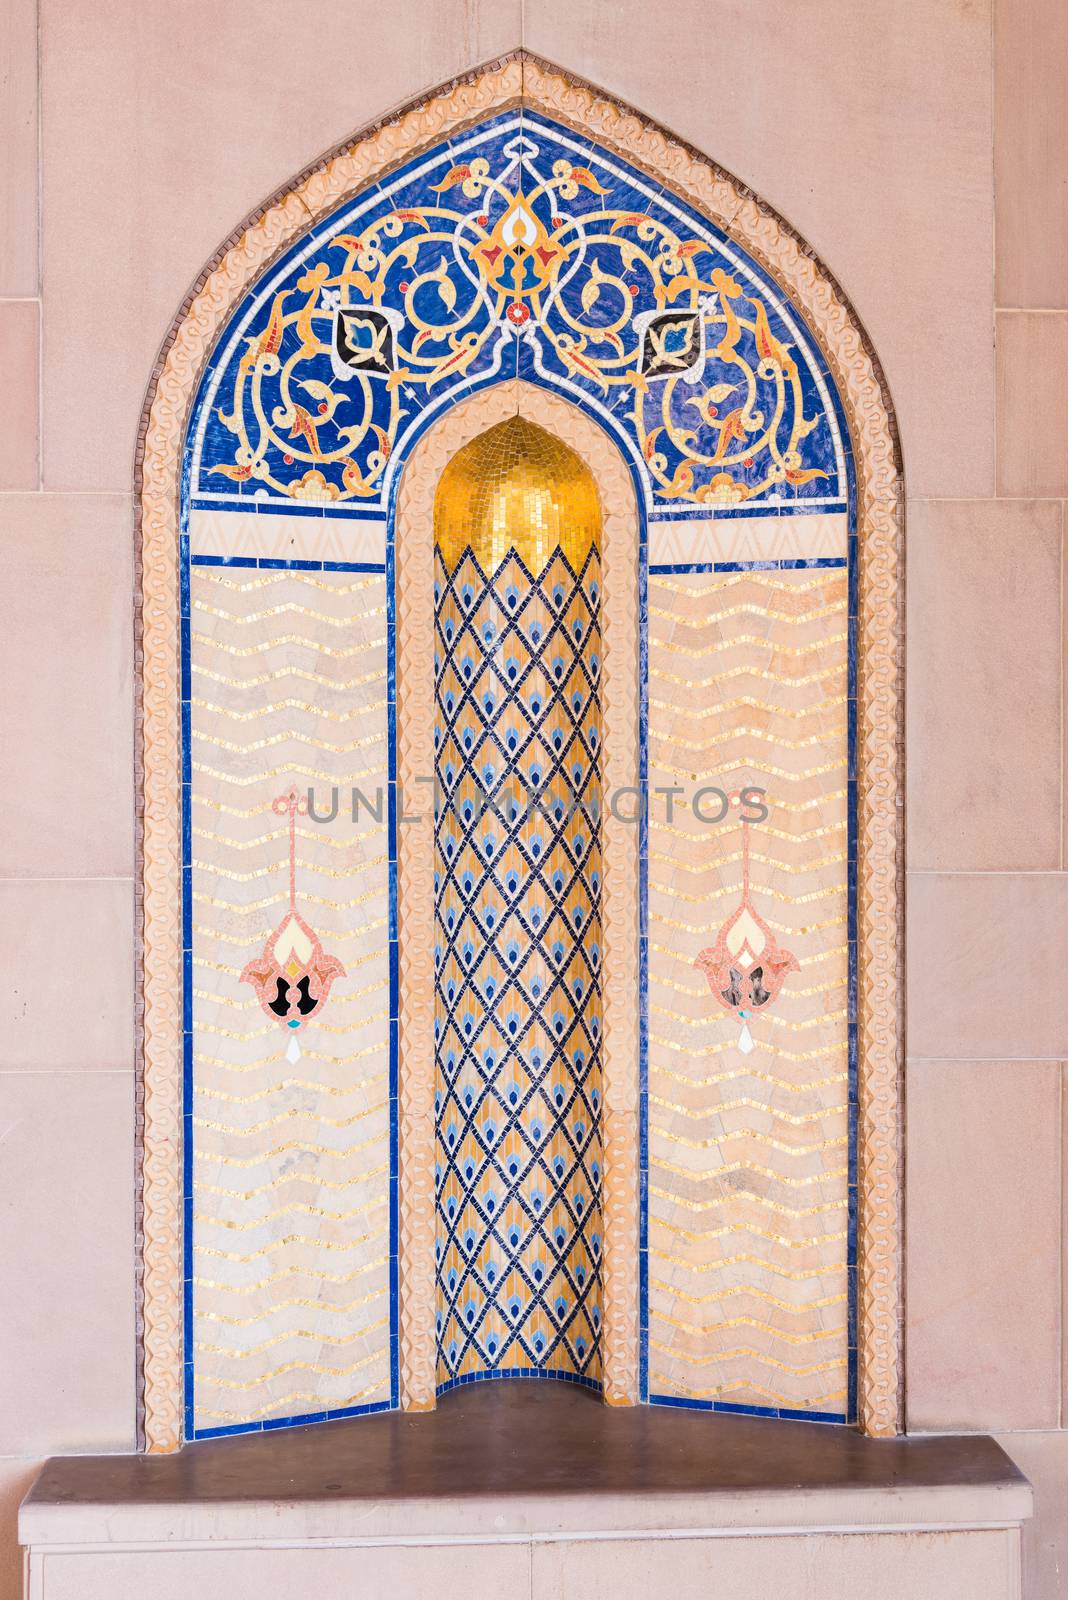 Muscat, Oman - February 28, 2016: Mosaic art at Sultan Qaboos Grand Mosque in Muscat, Oman. This is the largest and most decorated mosque in this mostly Muslim country.